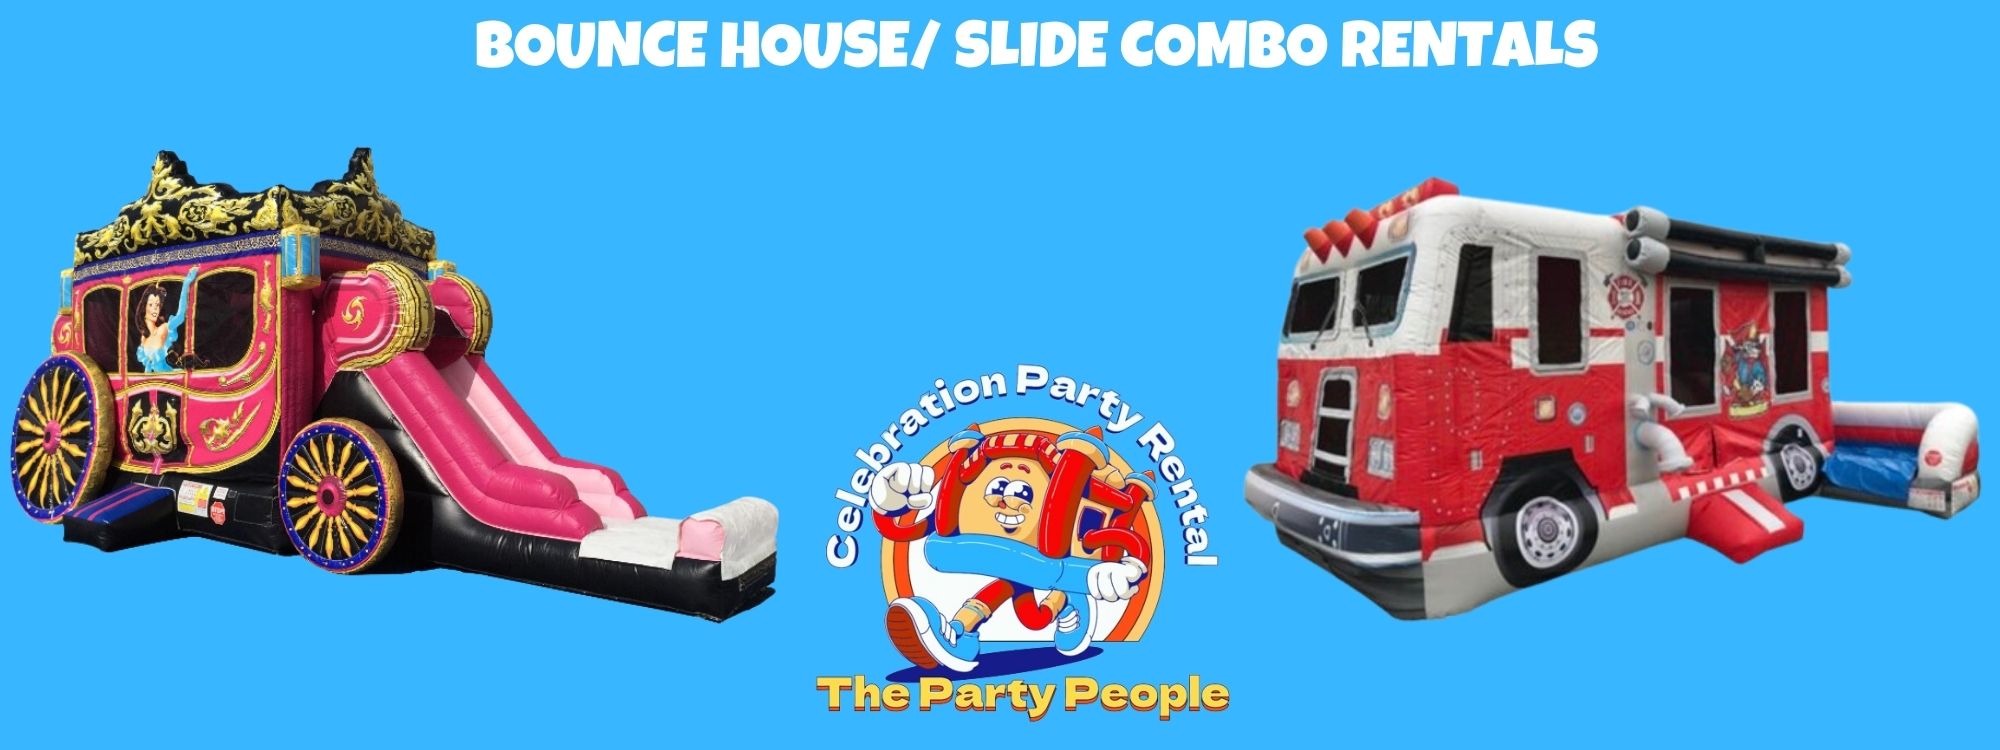 Bounce House With Slide Rentals In Jacksonville, FL.